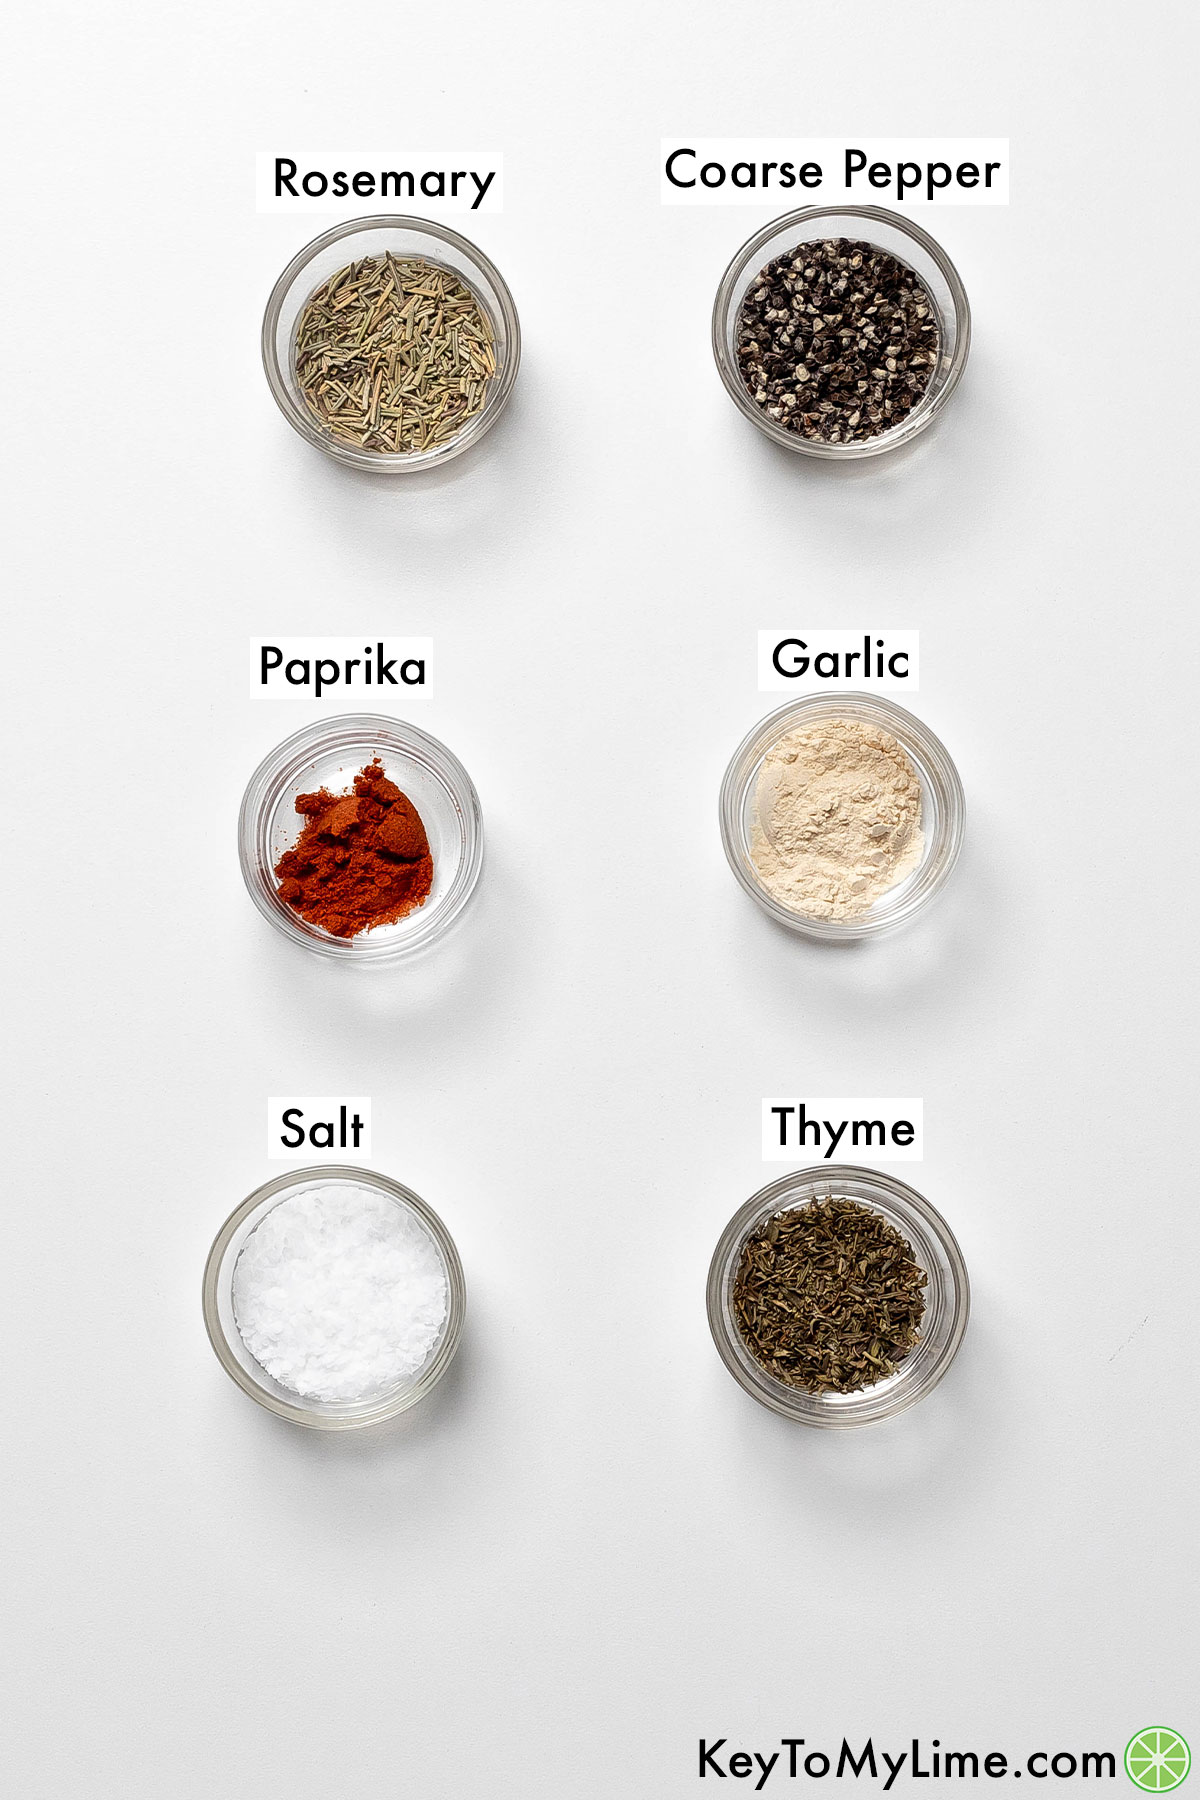 The labeled ingredients for prime rib rub.